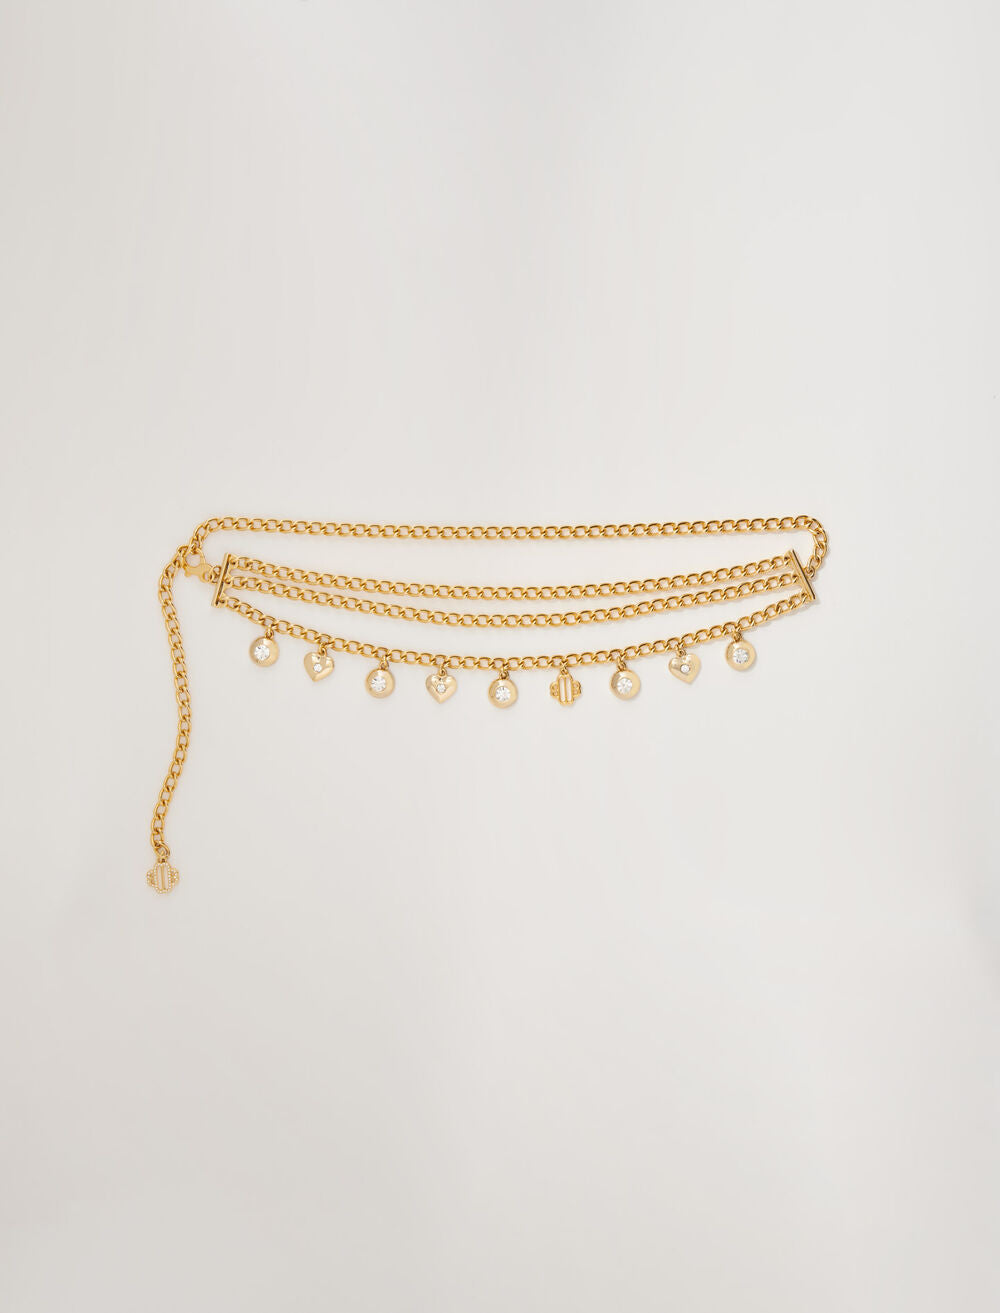  Gold featured JEWELLERY CHAIN BELT